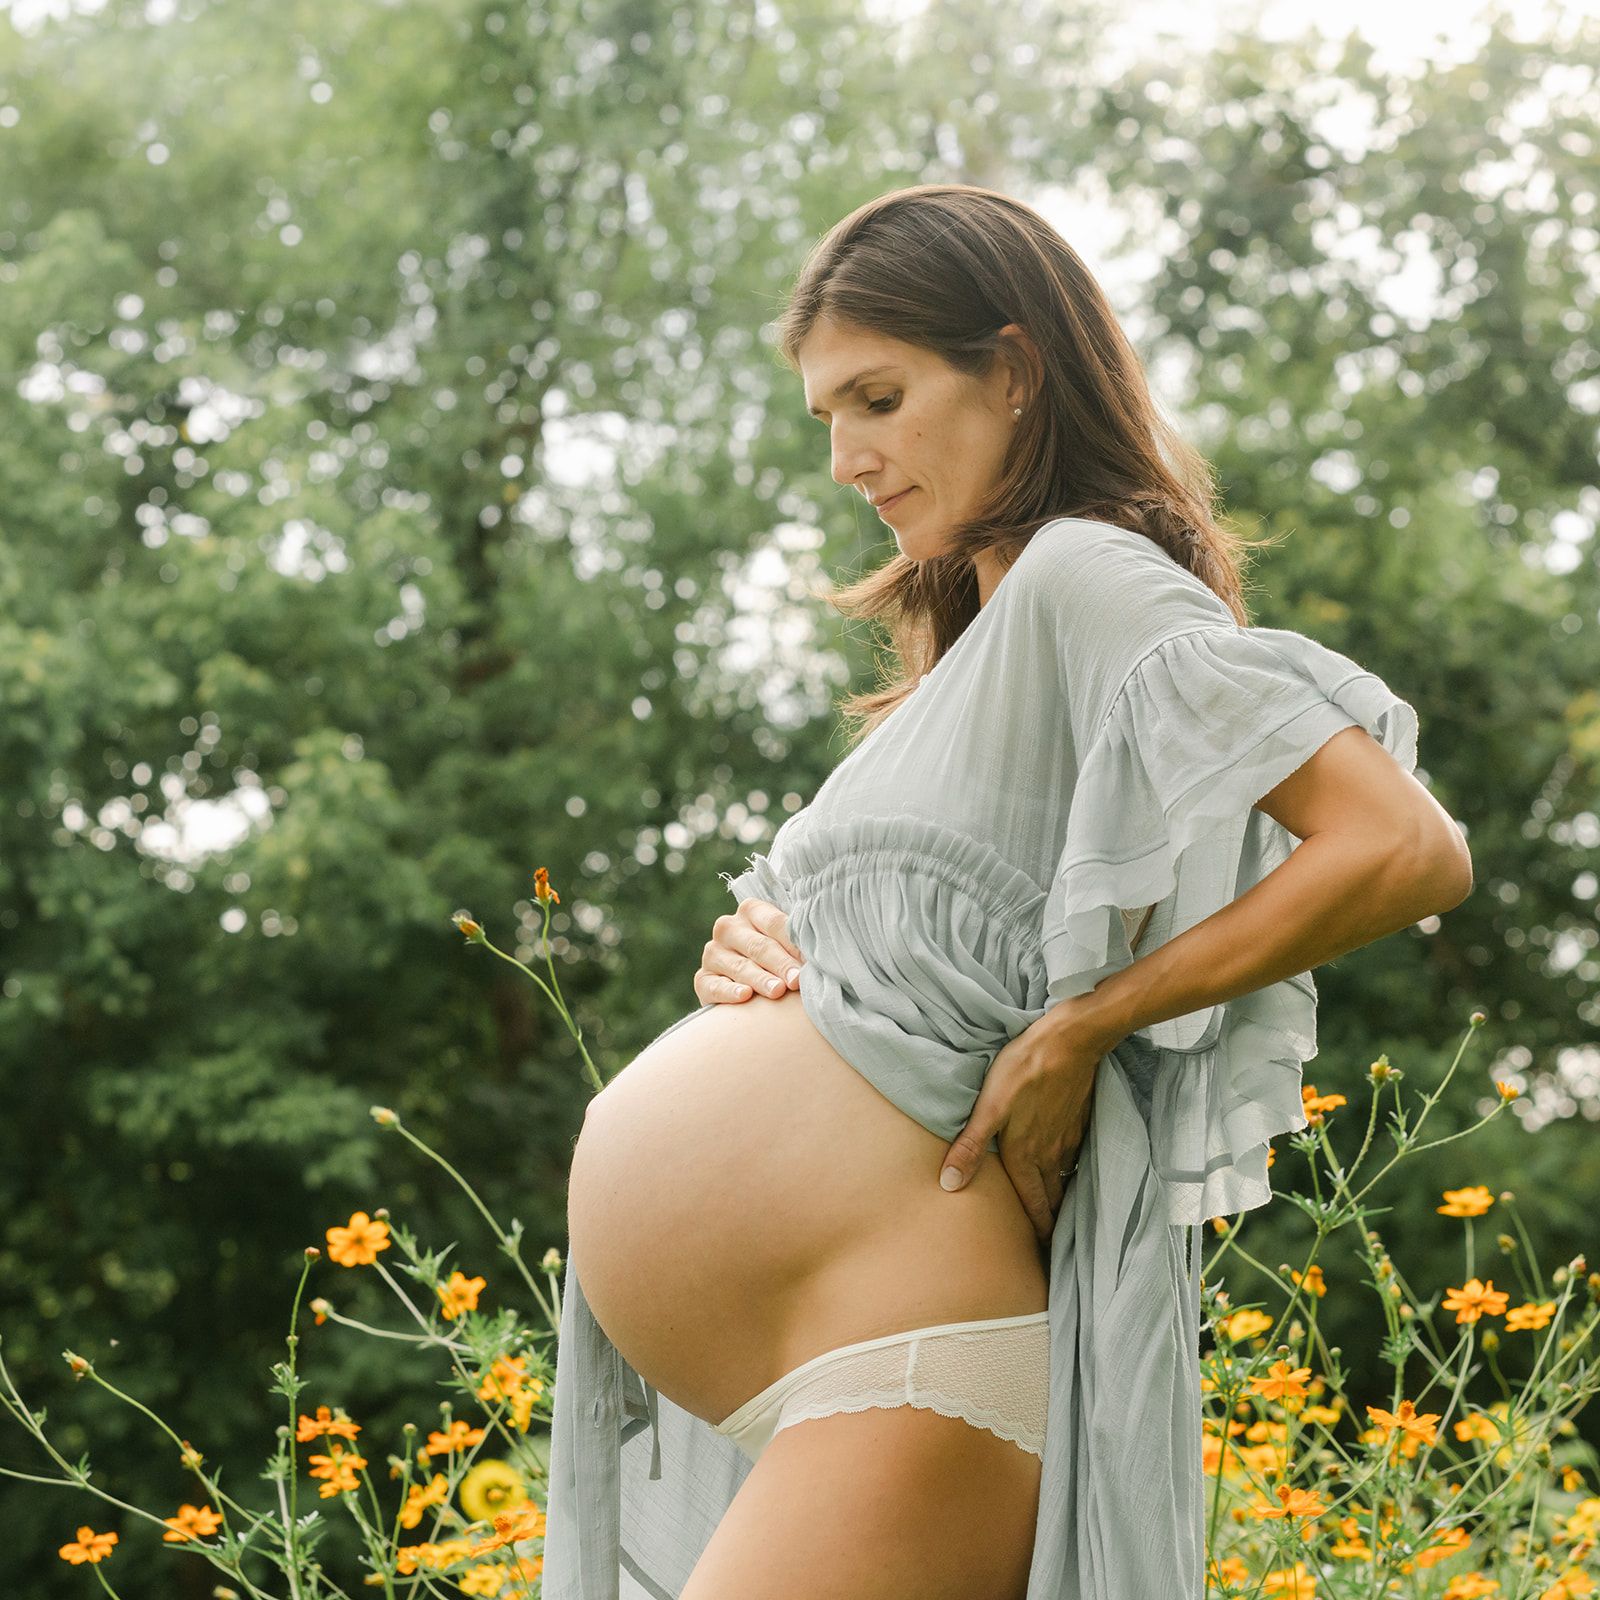 body empowerment and maternity session in nashville studio. mama in outdoor garden